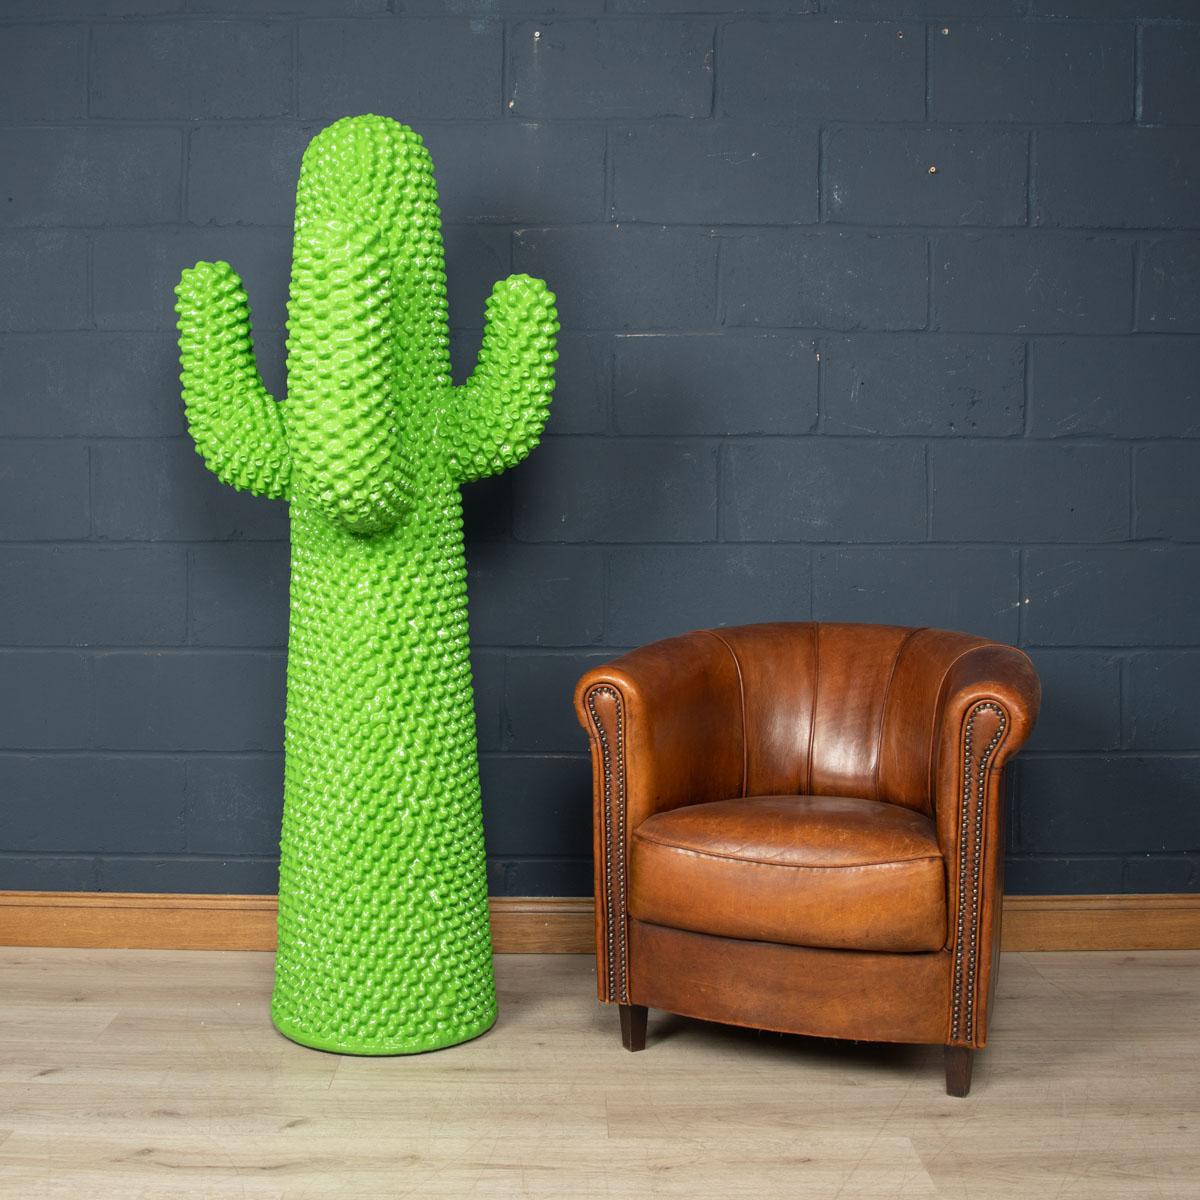 The 'Cactus' coat hanger is one of Design's most iconic and precious items. “Another Green” is a tribute to the original edition. Made by the same company, Gufram, the modern version has a green colour that is characterised by a lighter, brighter,